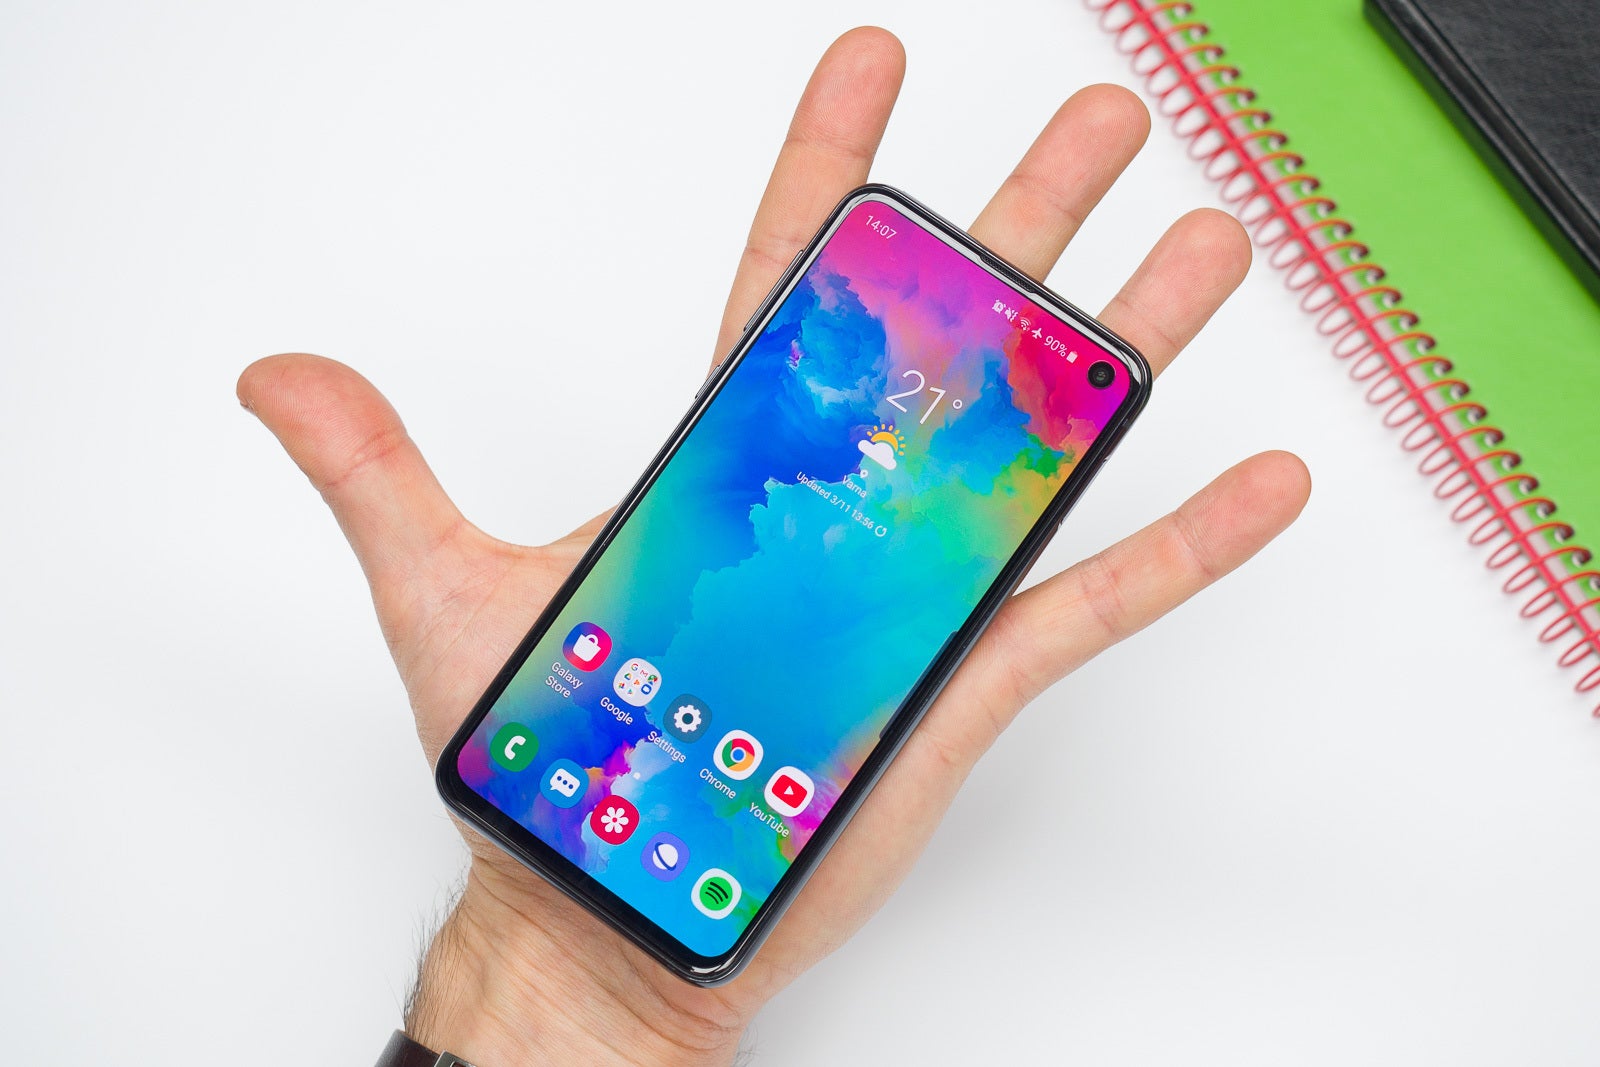 A Galaxy S10e-like phone but with S Pen capabilities? - A Cheaper Galaxy Note smartphone might be on the way